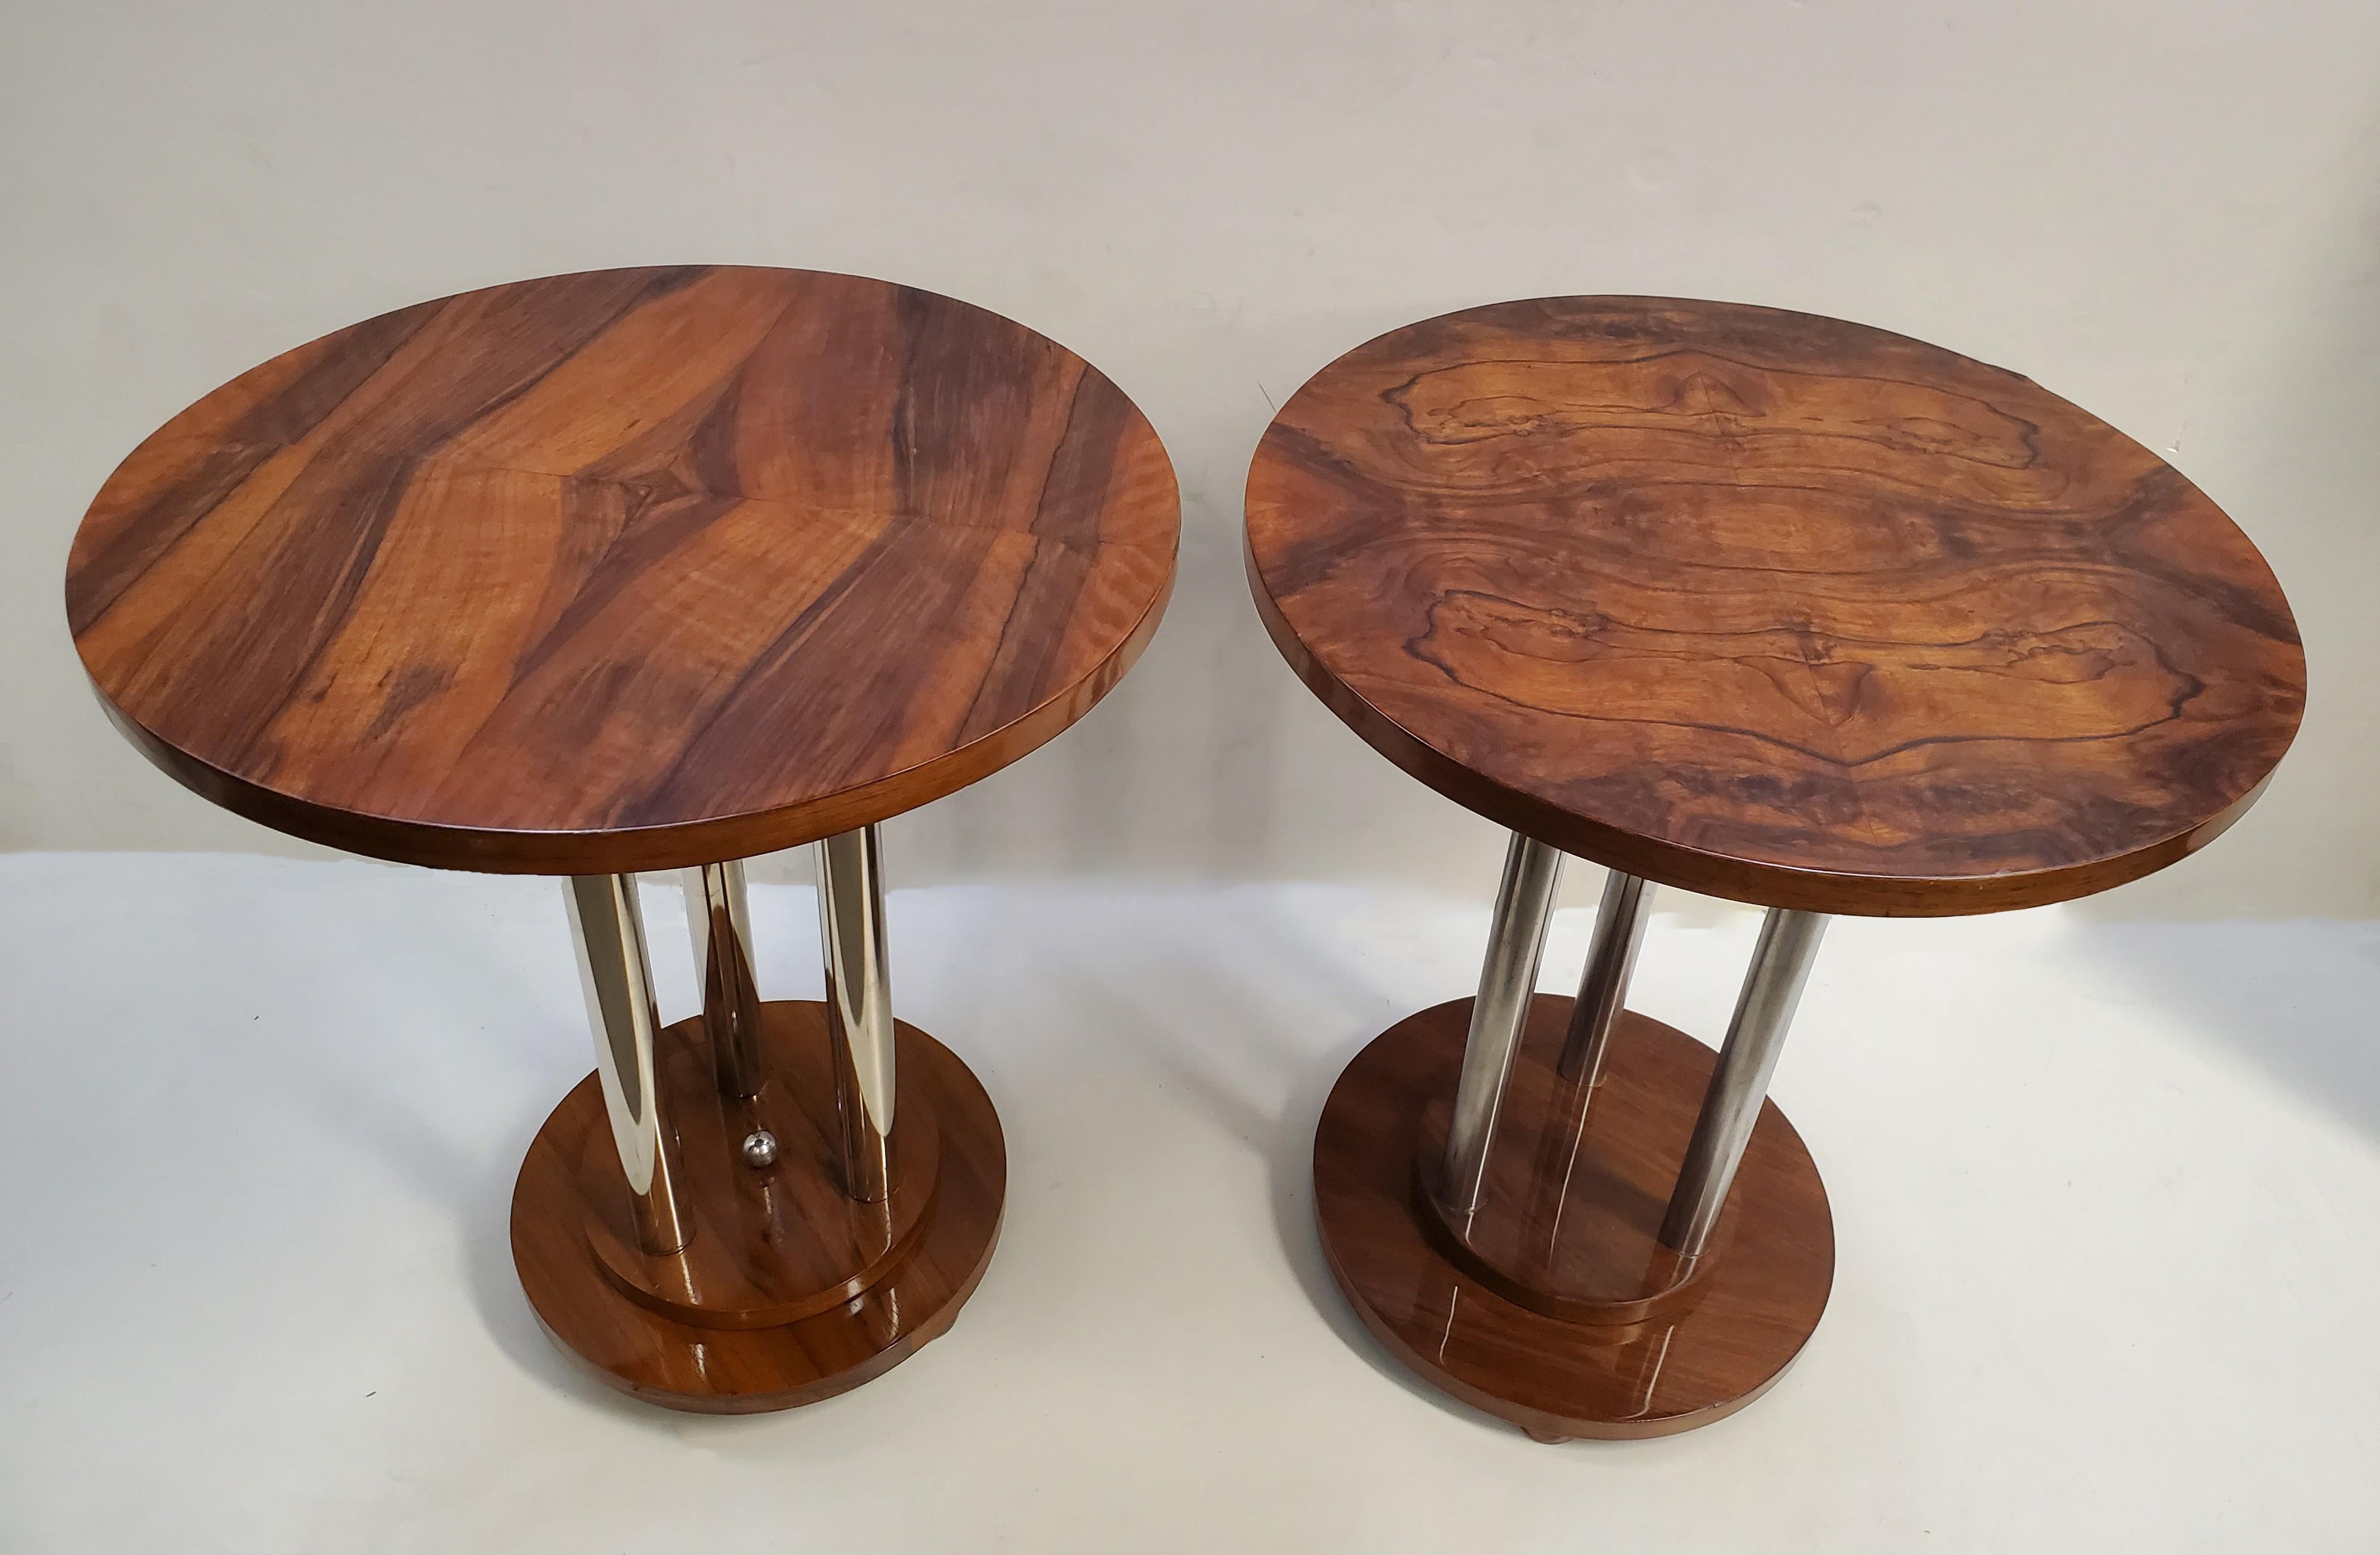 Similar Pair of French Art Deco Book Matched Walnut and Metal End Tables 1